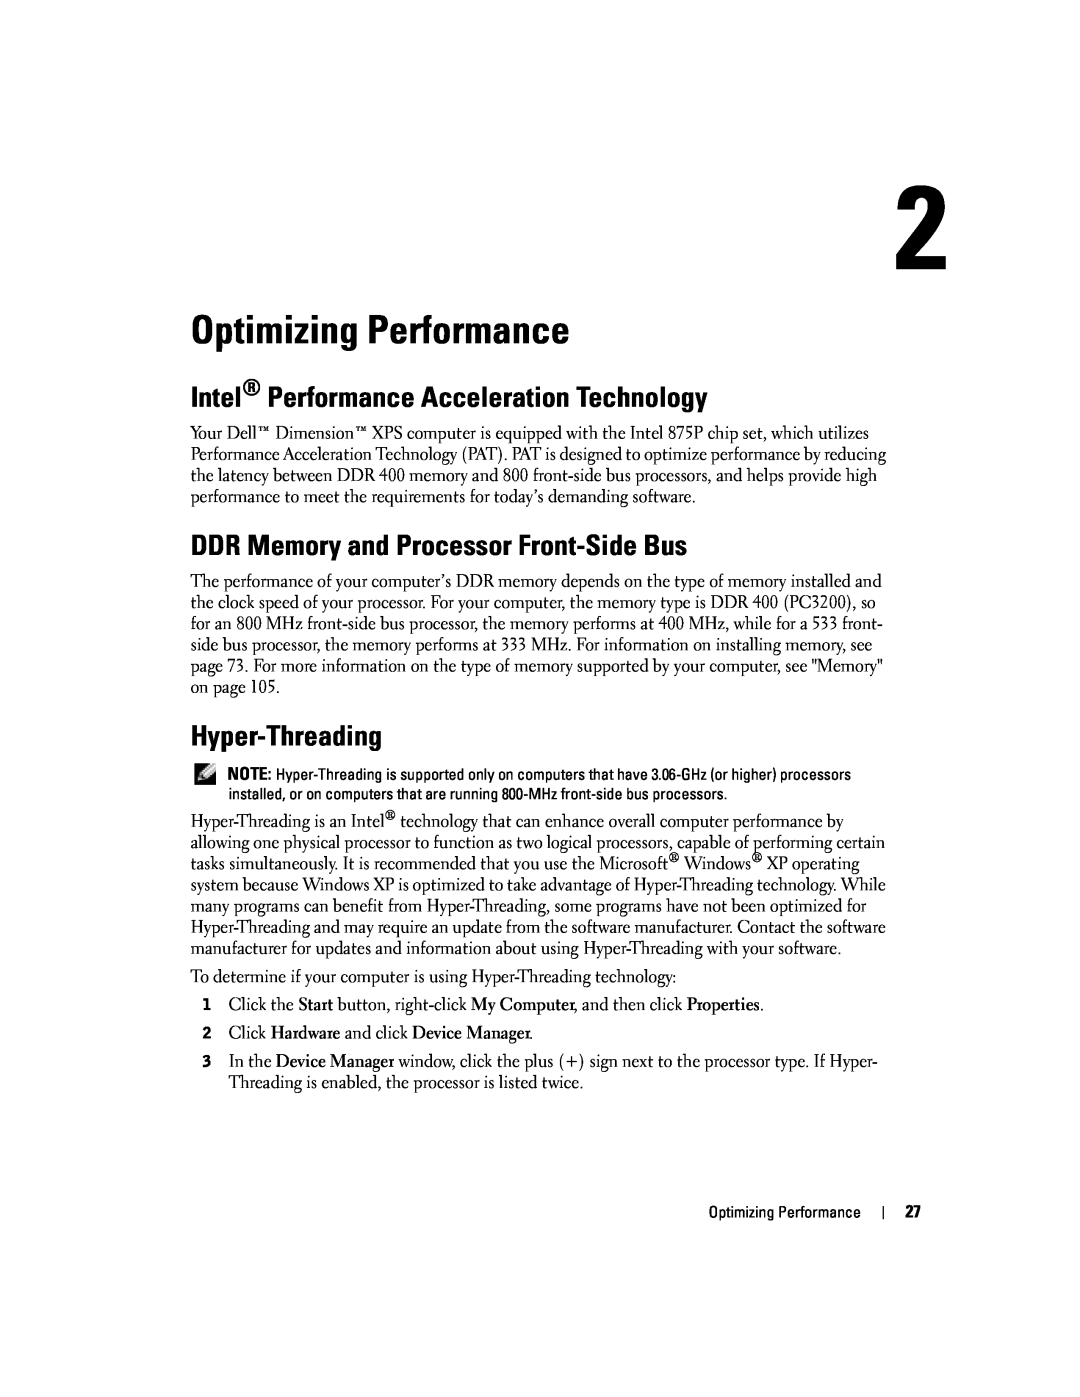 Dell XPS manual Optimizing Performance, Intel Performance Acceleration Technology, DDR Memory and Processor Front-Side Bus 